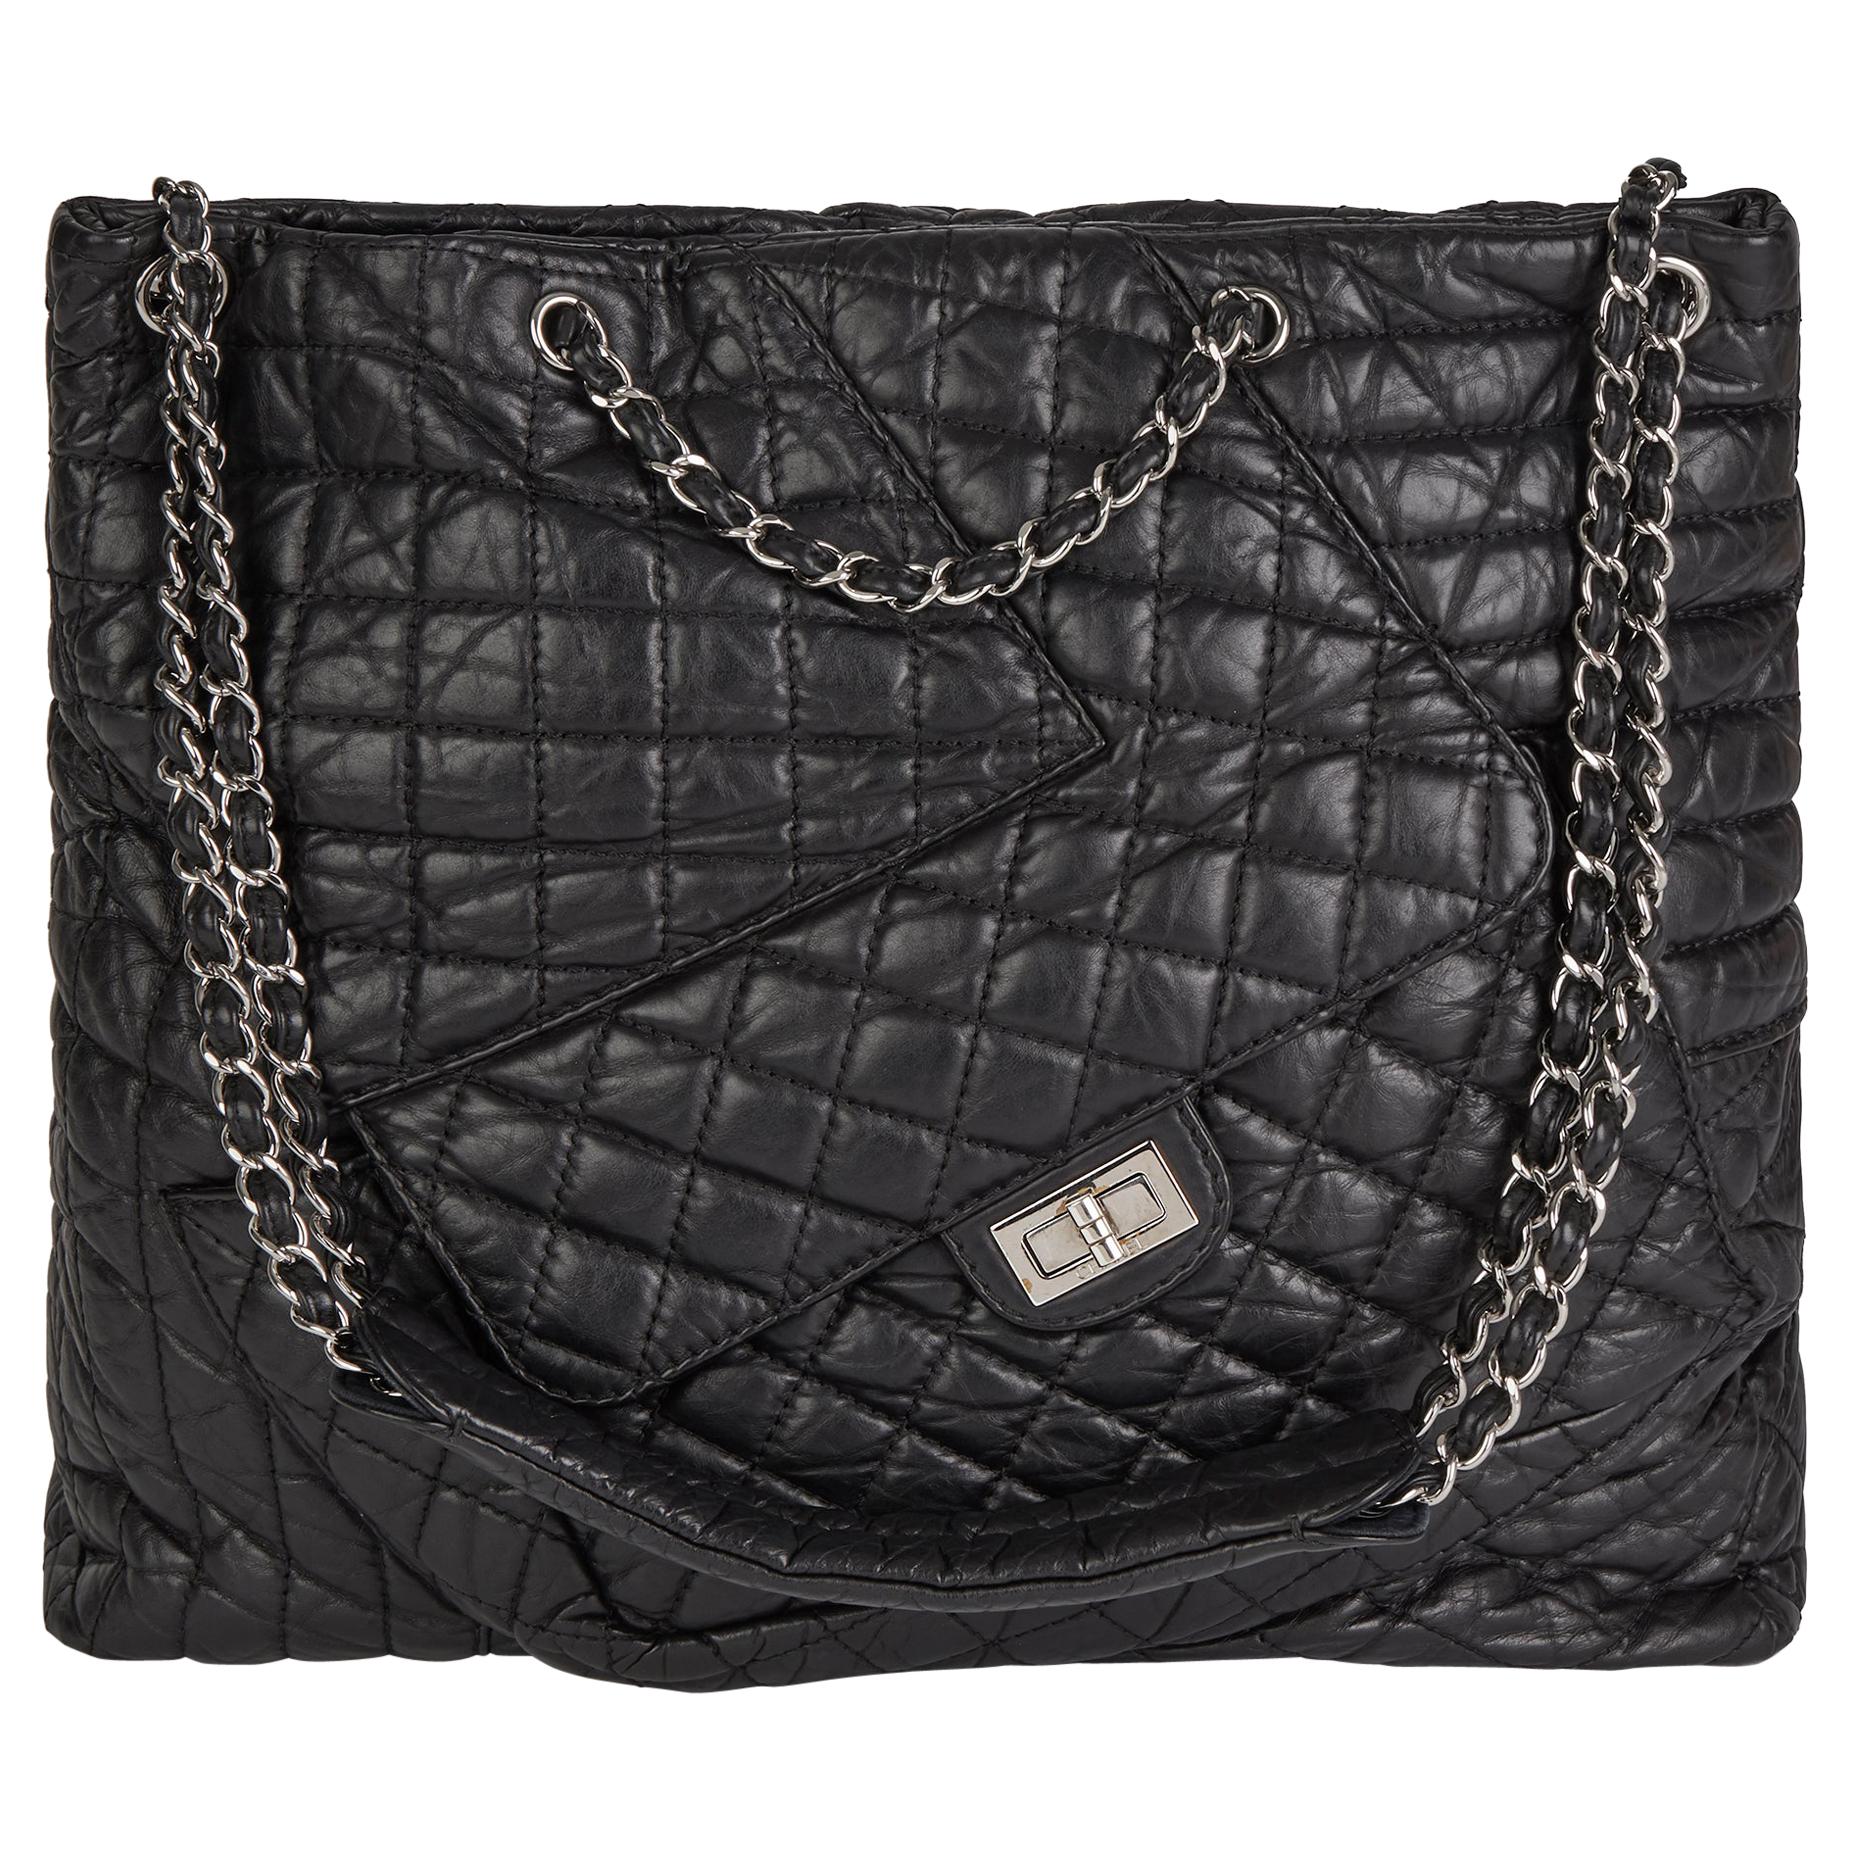 2010 Chanel Black Quilted Aged Calfskin Leather Fantasy Shopping Tote